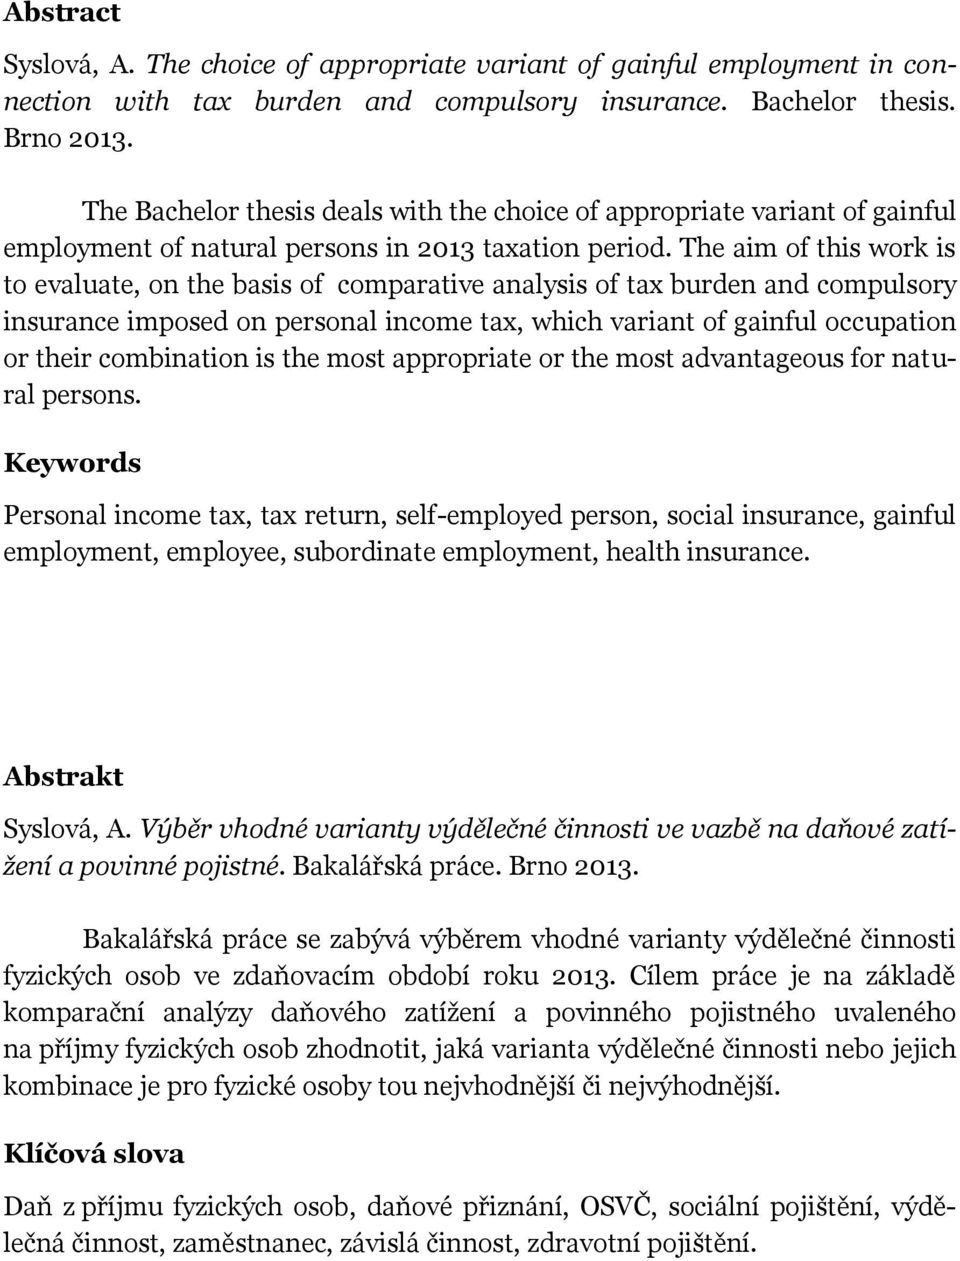 The aim of this work is to evaluate, on the basis of comparative analysis of tax burden and compulsory insurance imposed on personal income tax, which variant of gainful occupation or their